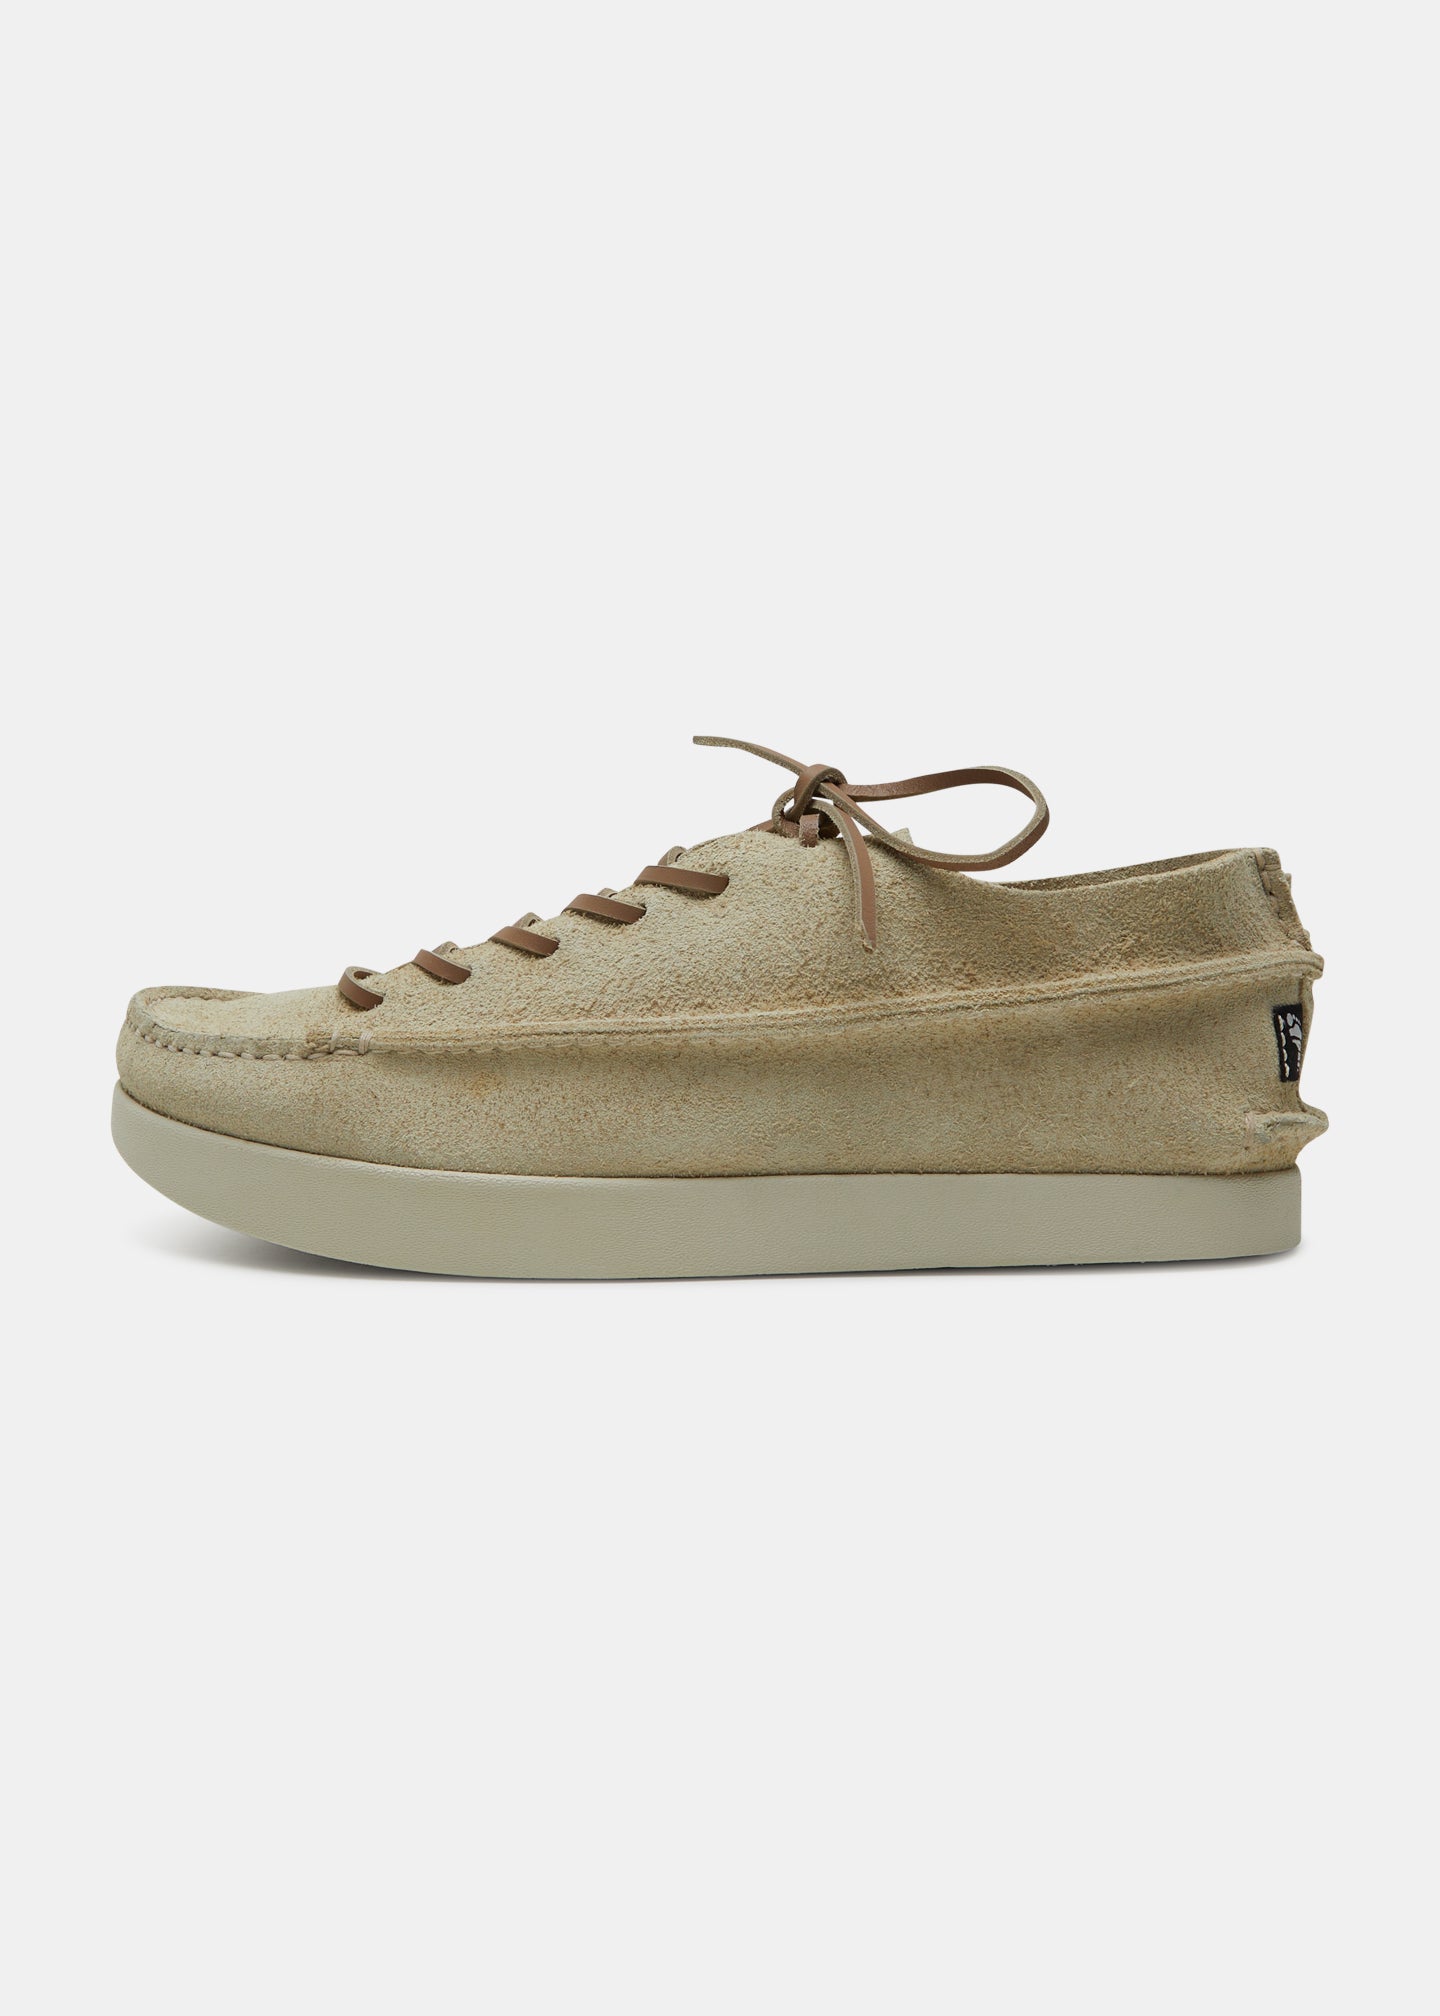 Yogi Finn Suede Lace Up - Hairy Sand - Side